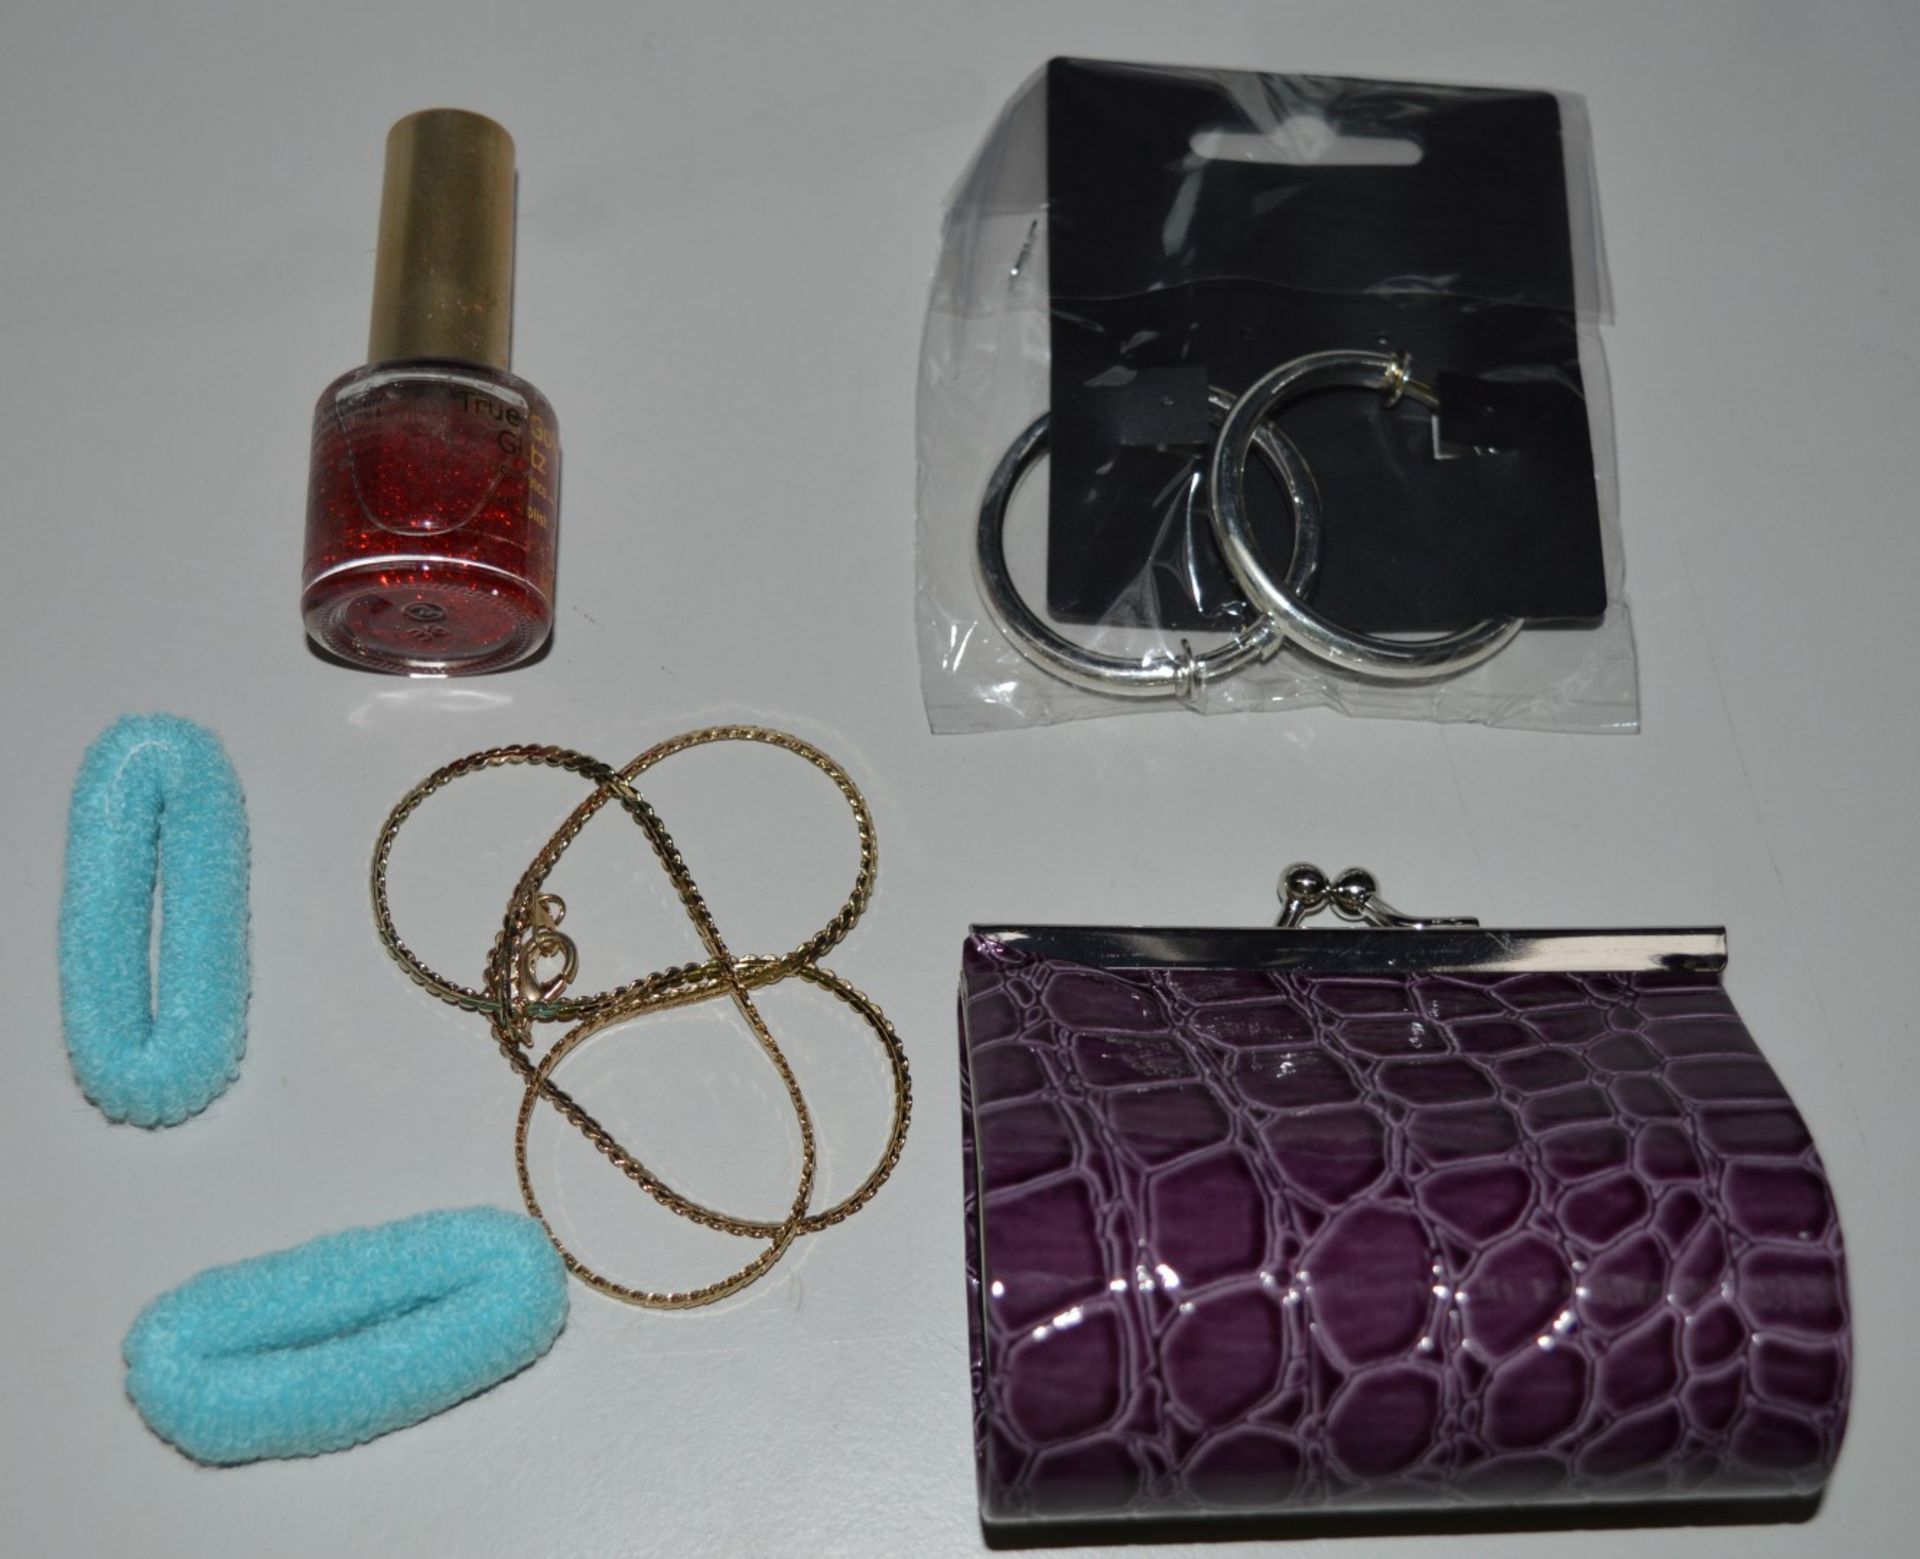 50 x Girls Beauty Gift Sets - Each Set Includes Items Such as a Stylish Purse, Ear Rings, Hair - Image 6 of 14